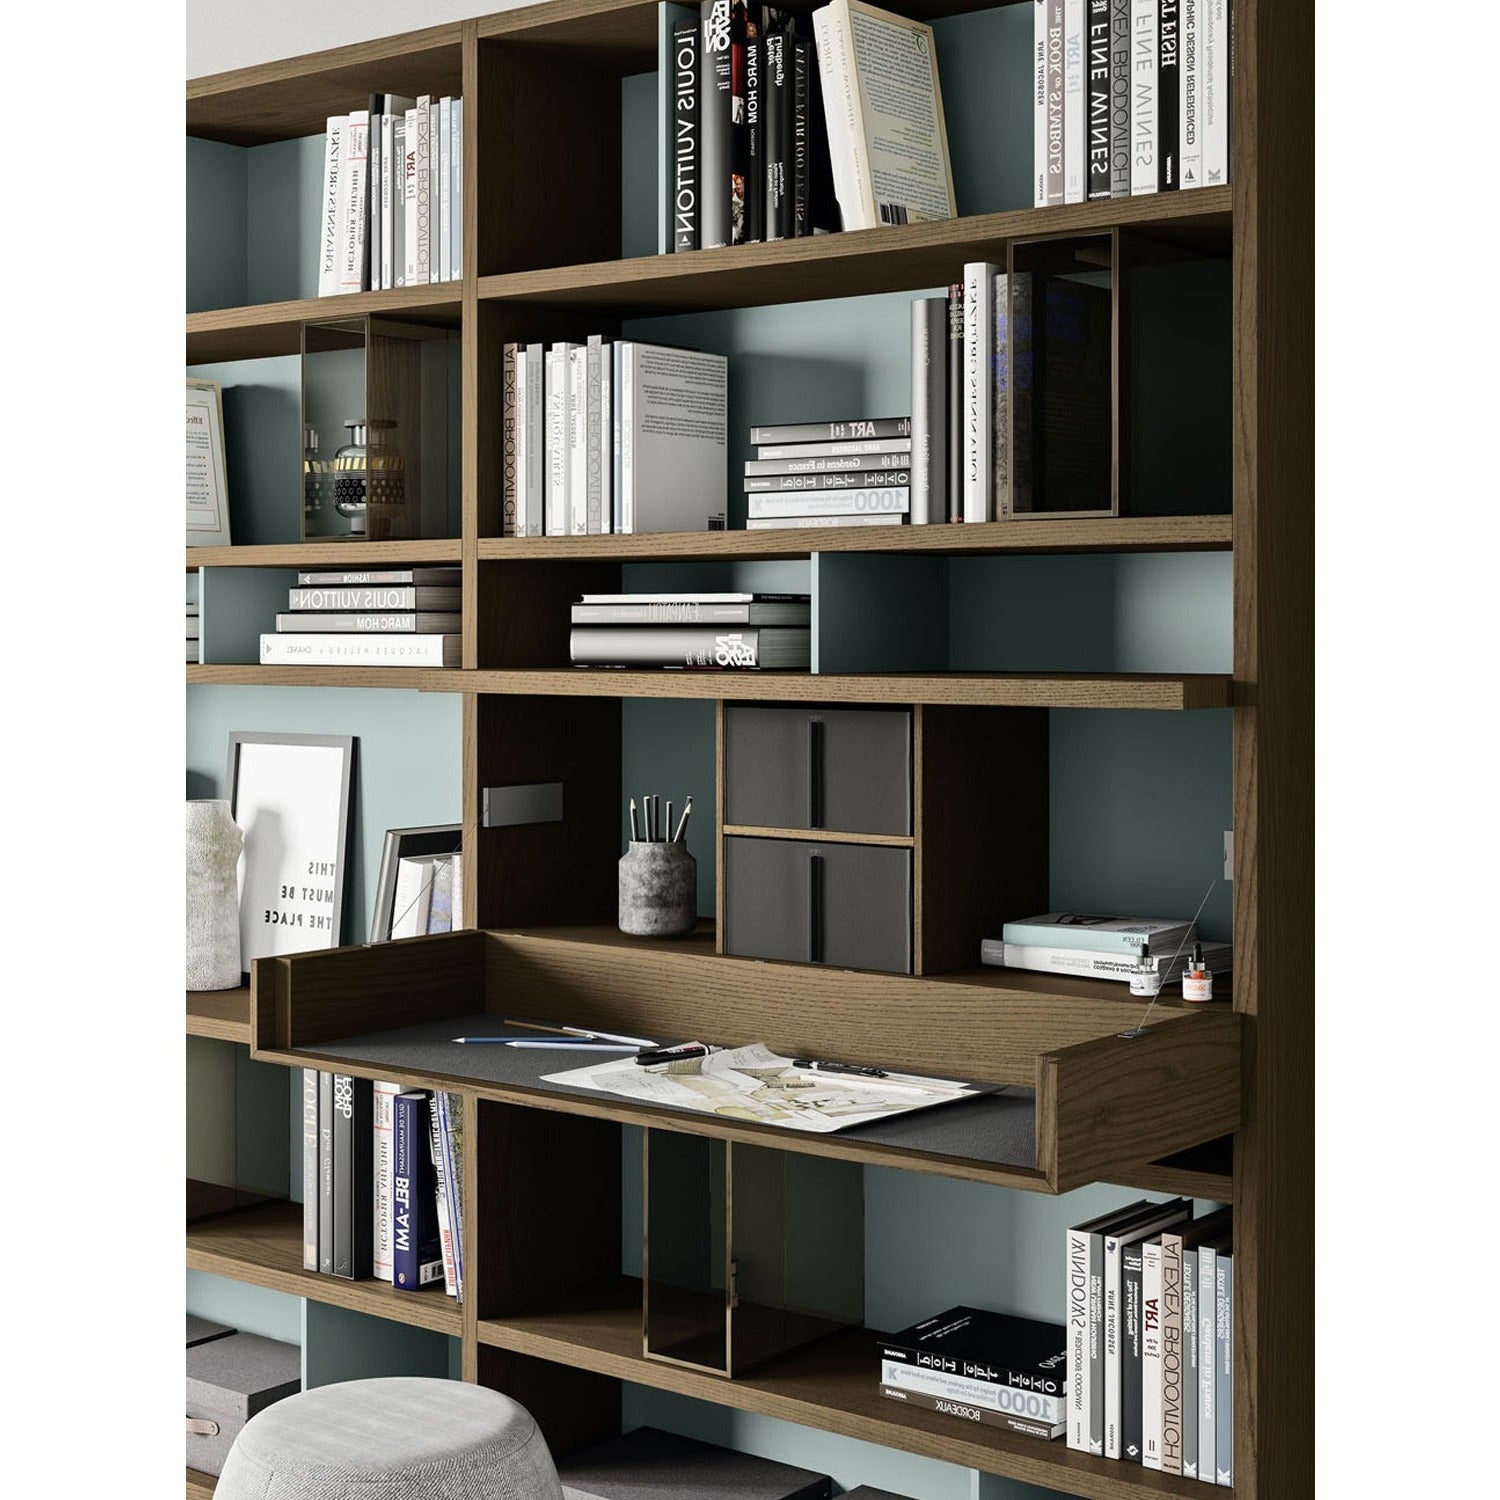 Day 29 Logico Wall Unit by Orme Design